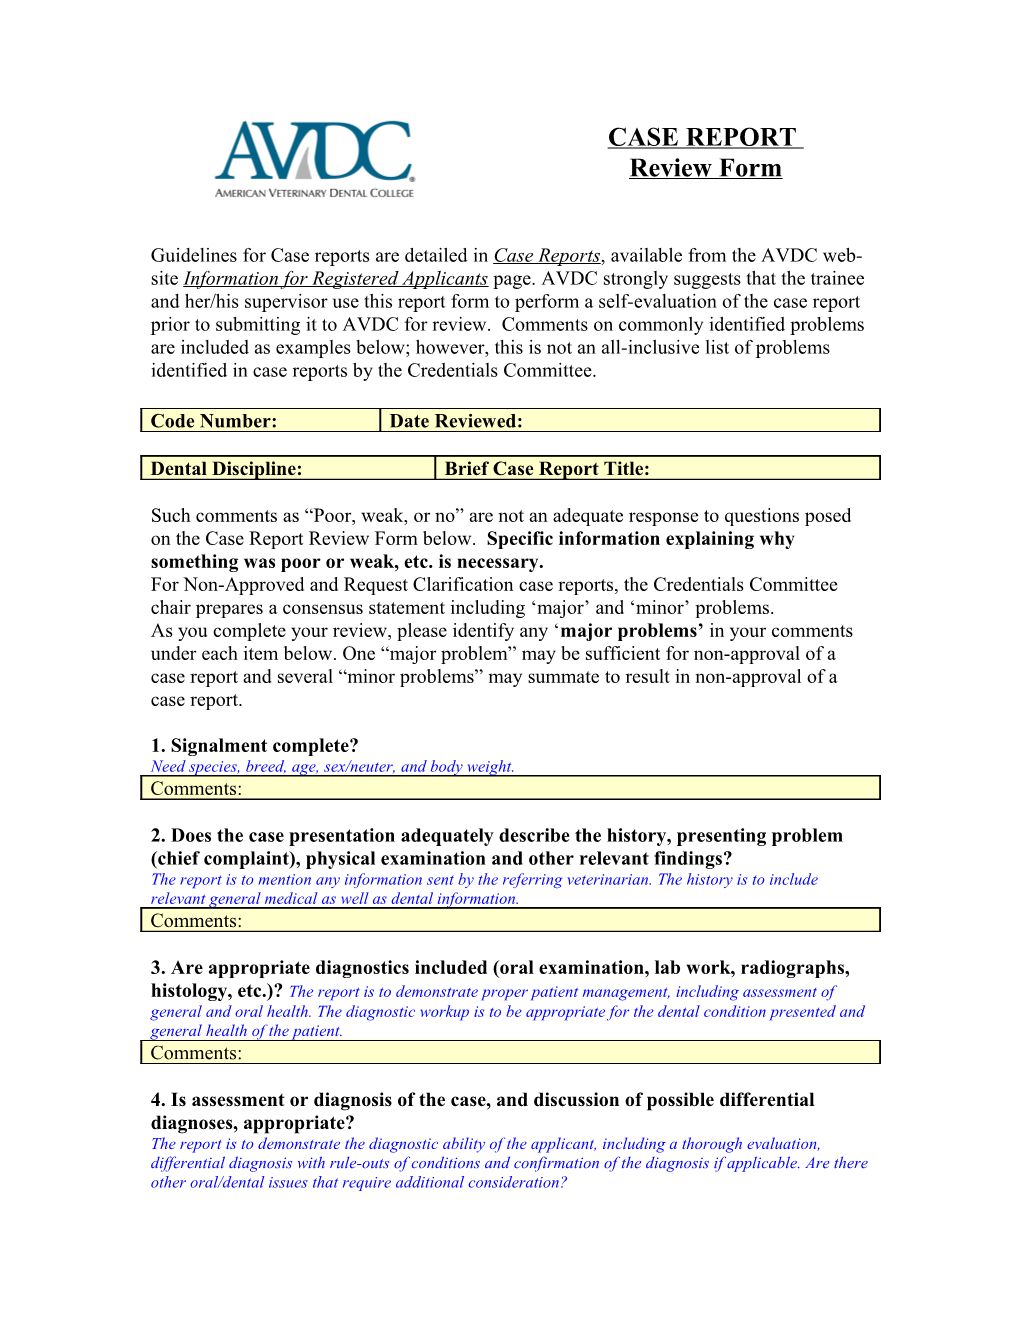 Guidelines for Case Reports Are Detailed in Case Reports, Available from the AVDC Web-Site